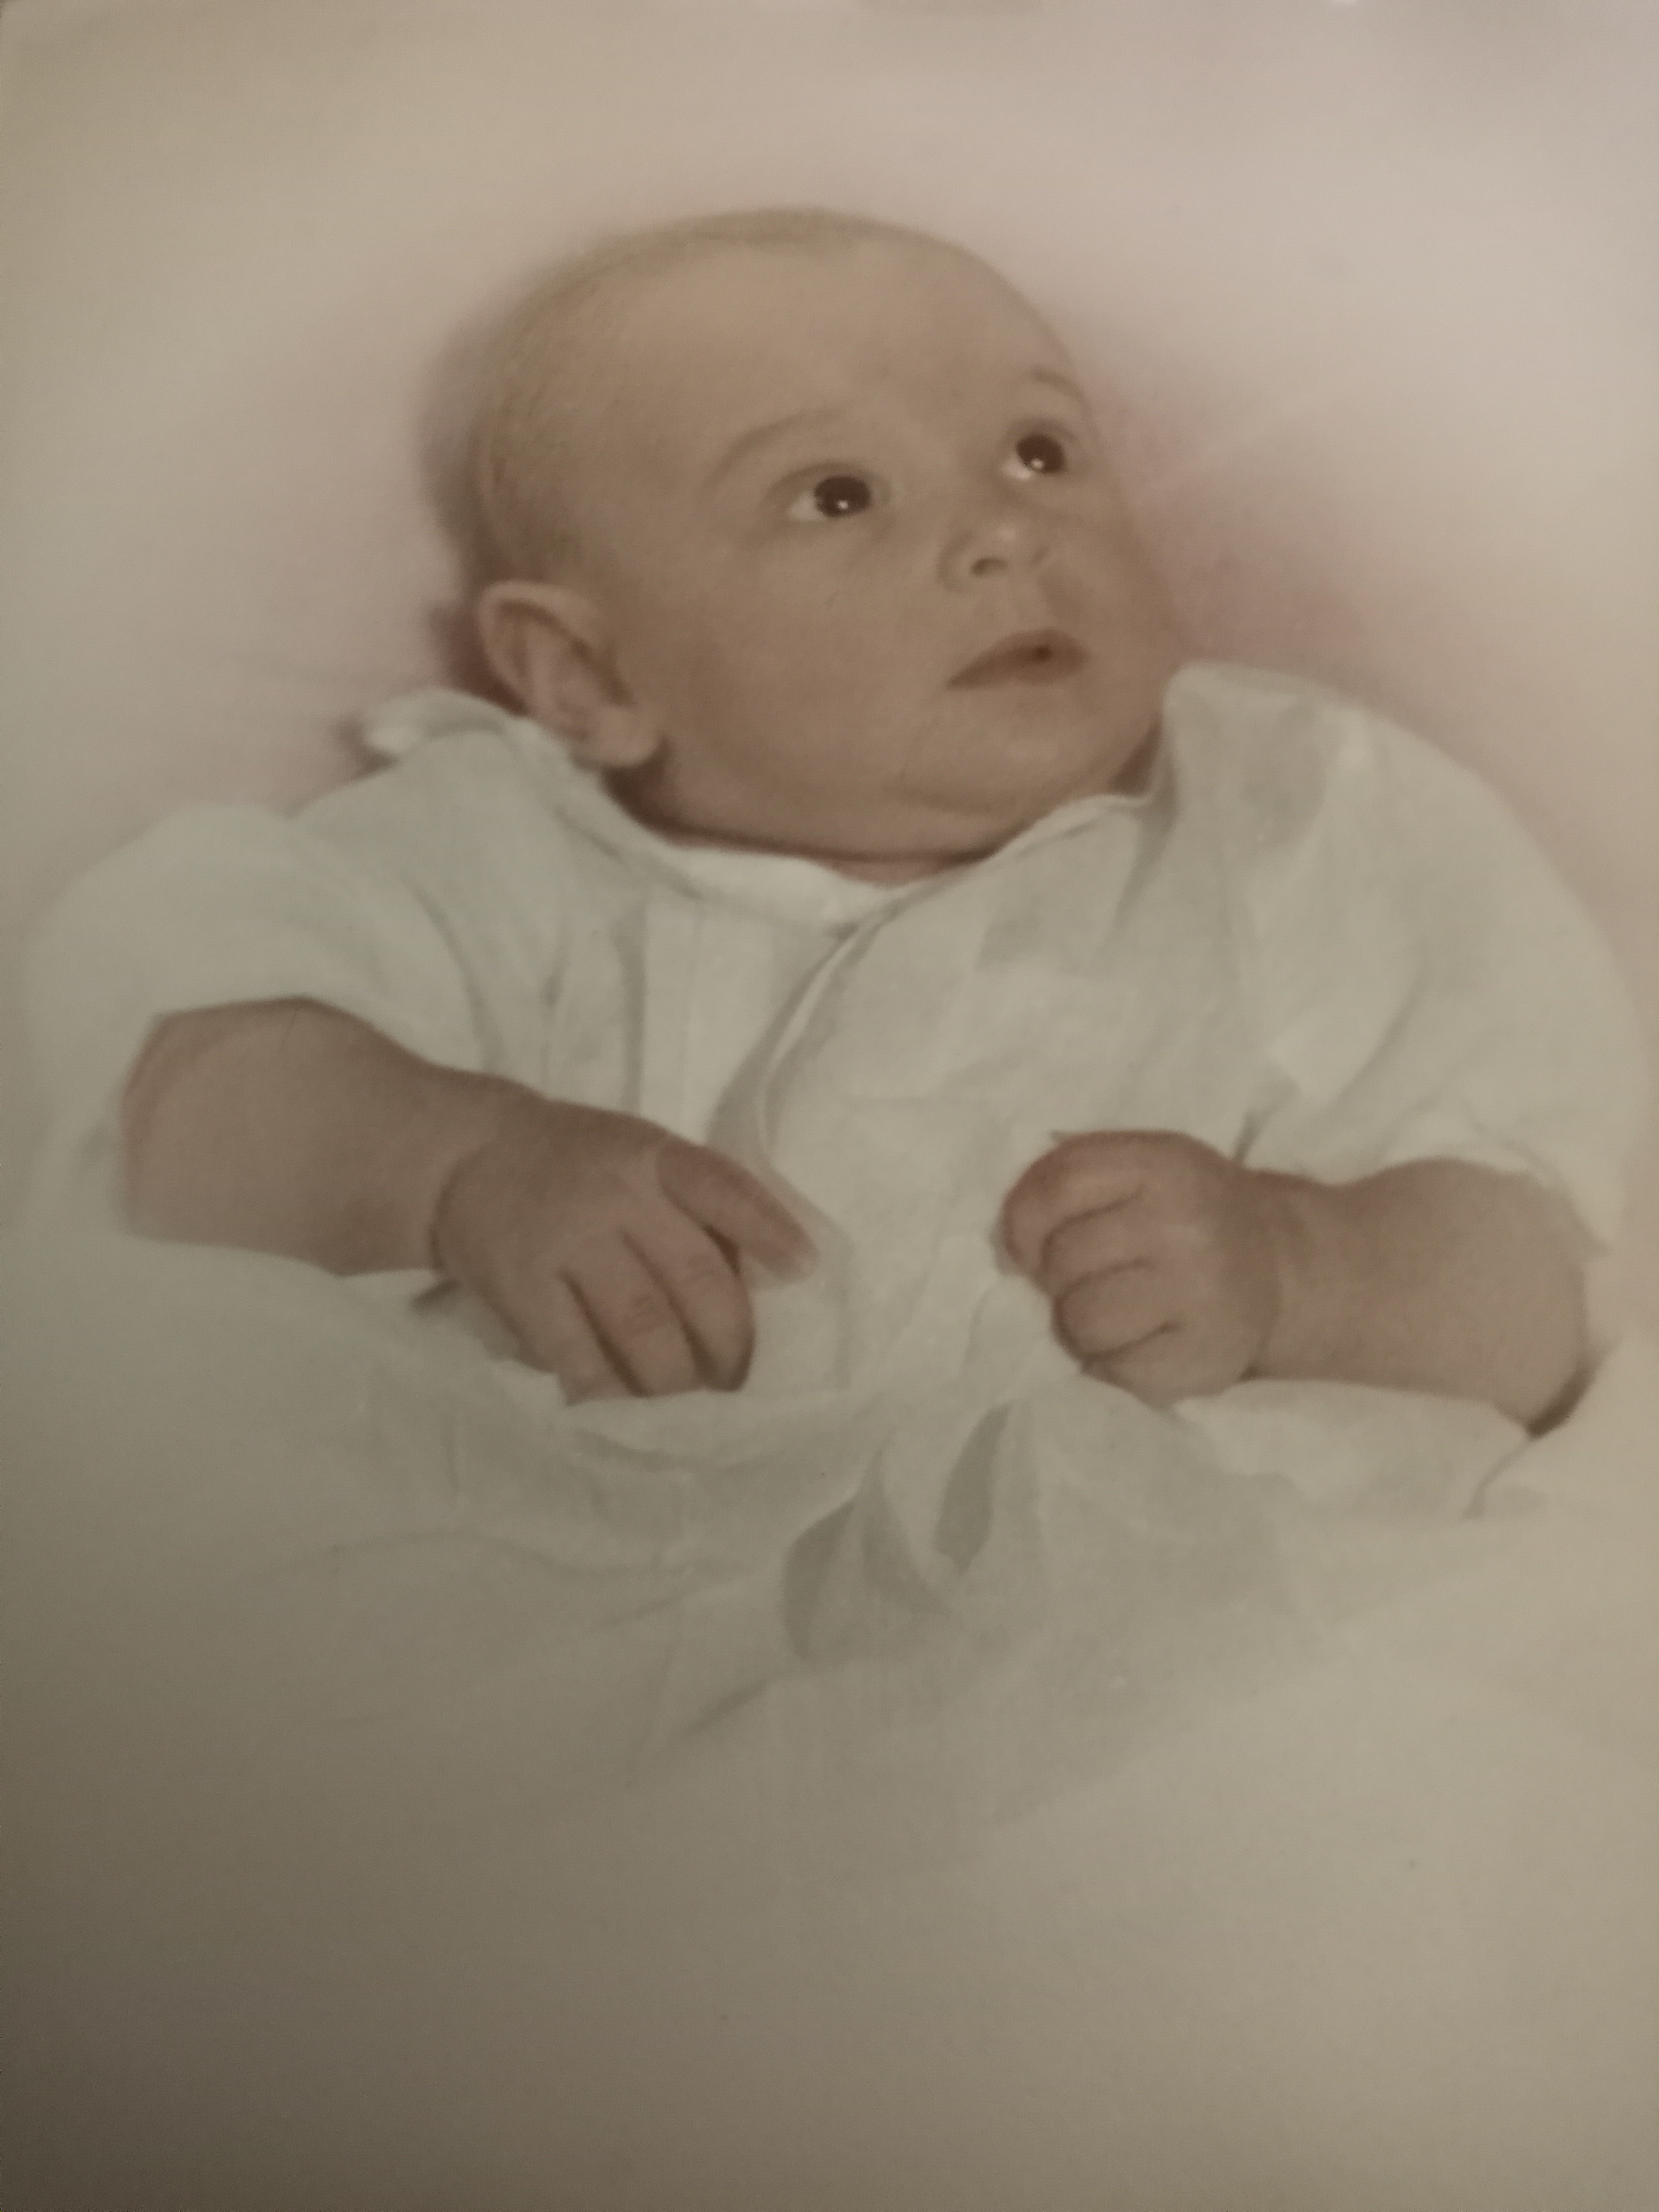 Pamela Claire Thompson 1st 
Baby picture 